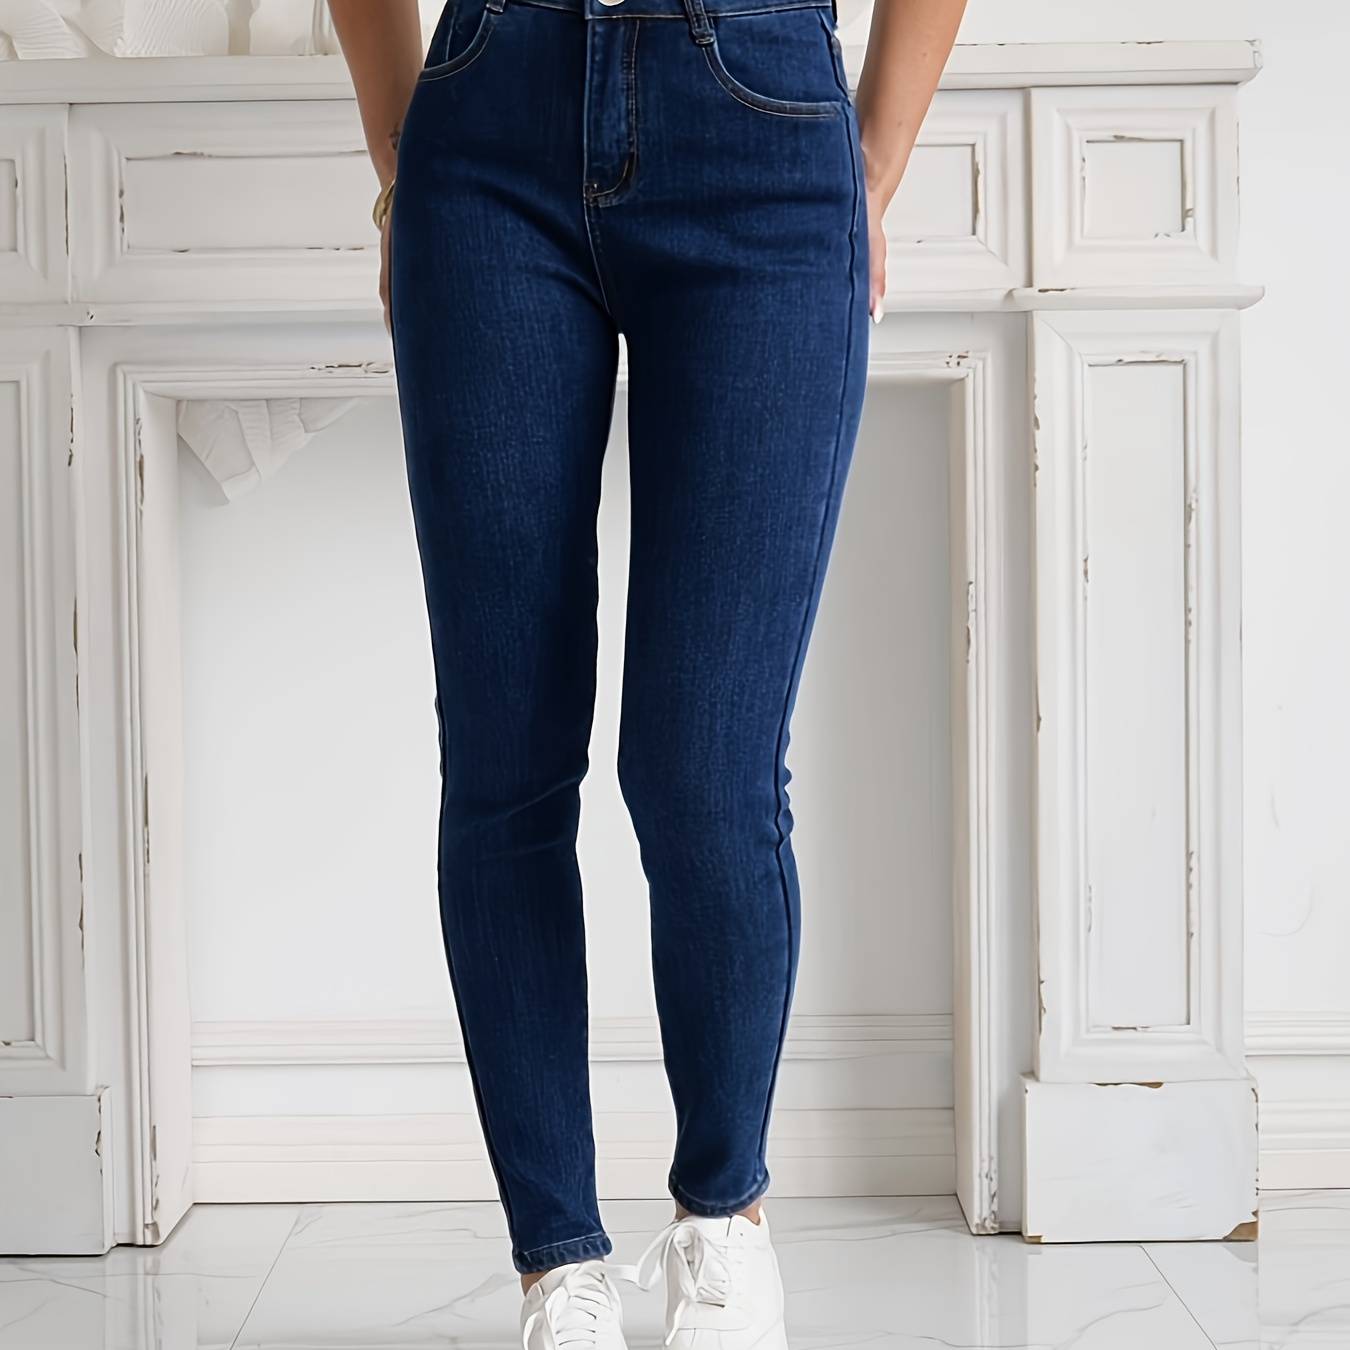 

Women's Stretch Skinny Jeans, Classic High Waist Denim Pants, Casual Plus Size Fashion, Versatile Blue Jean Trousers For Fall